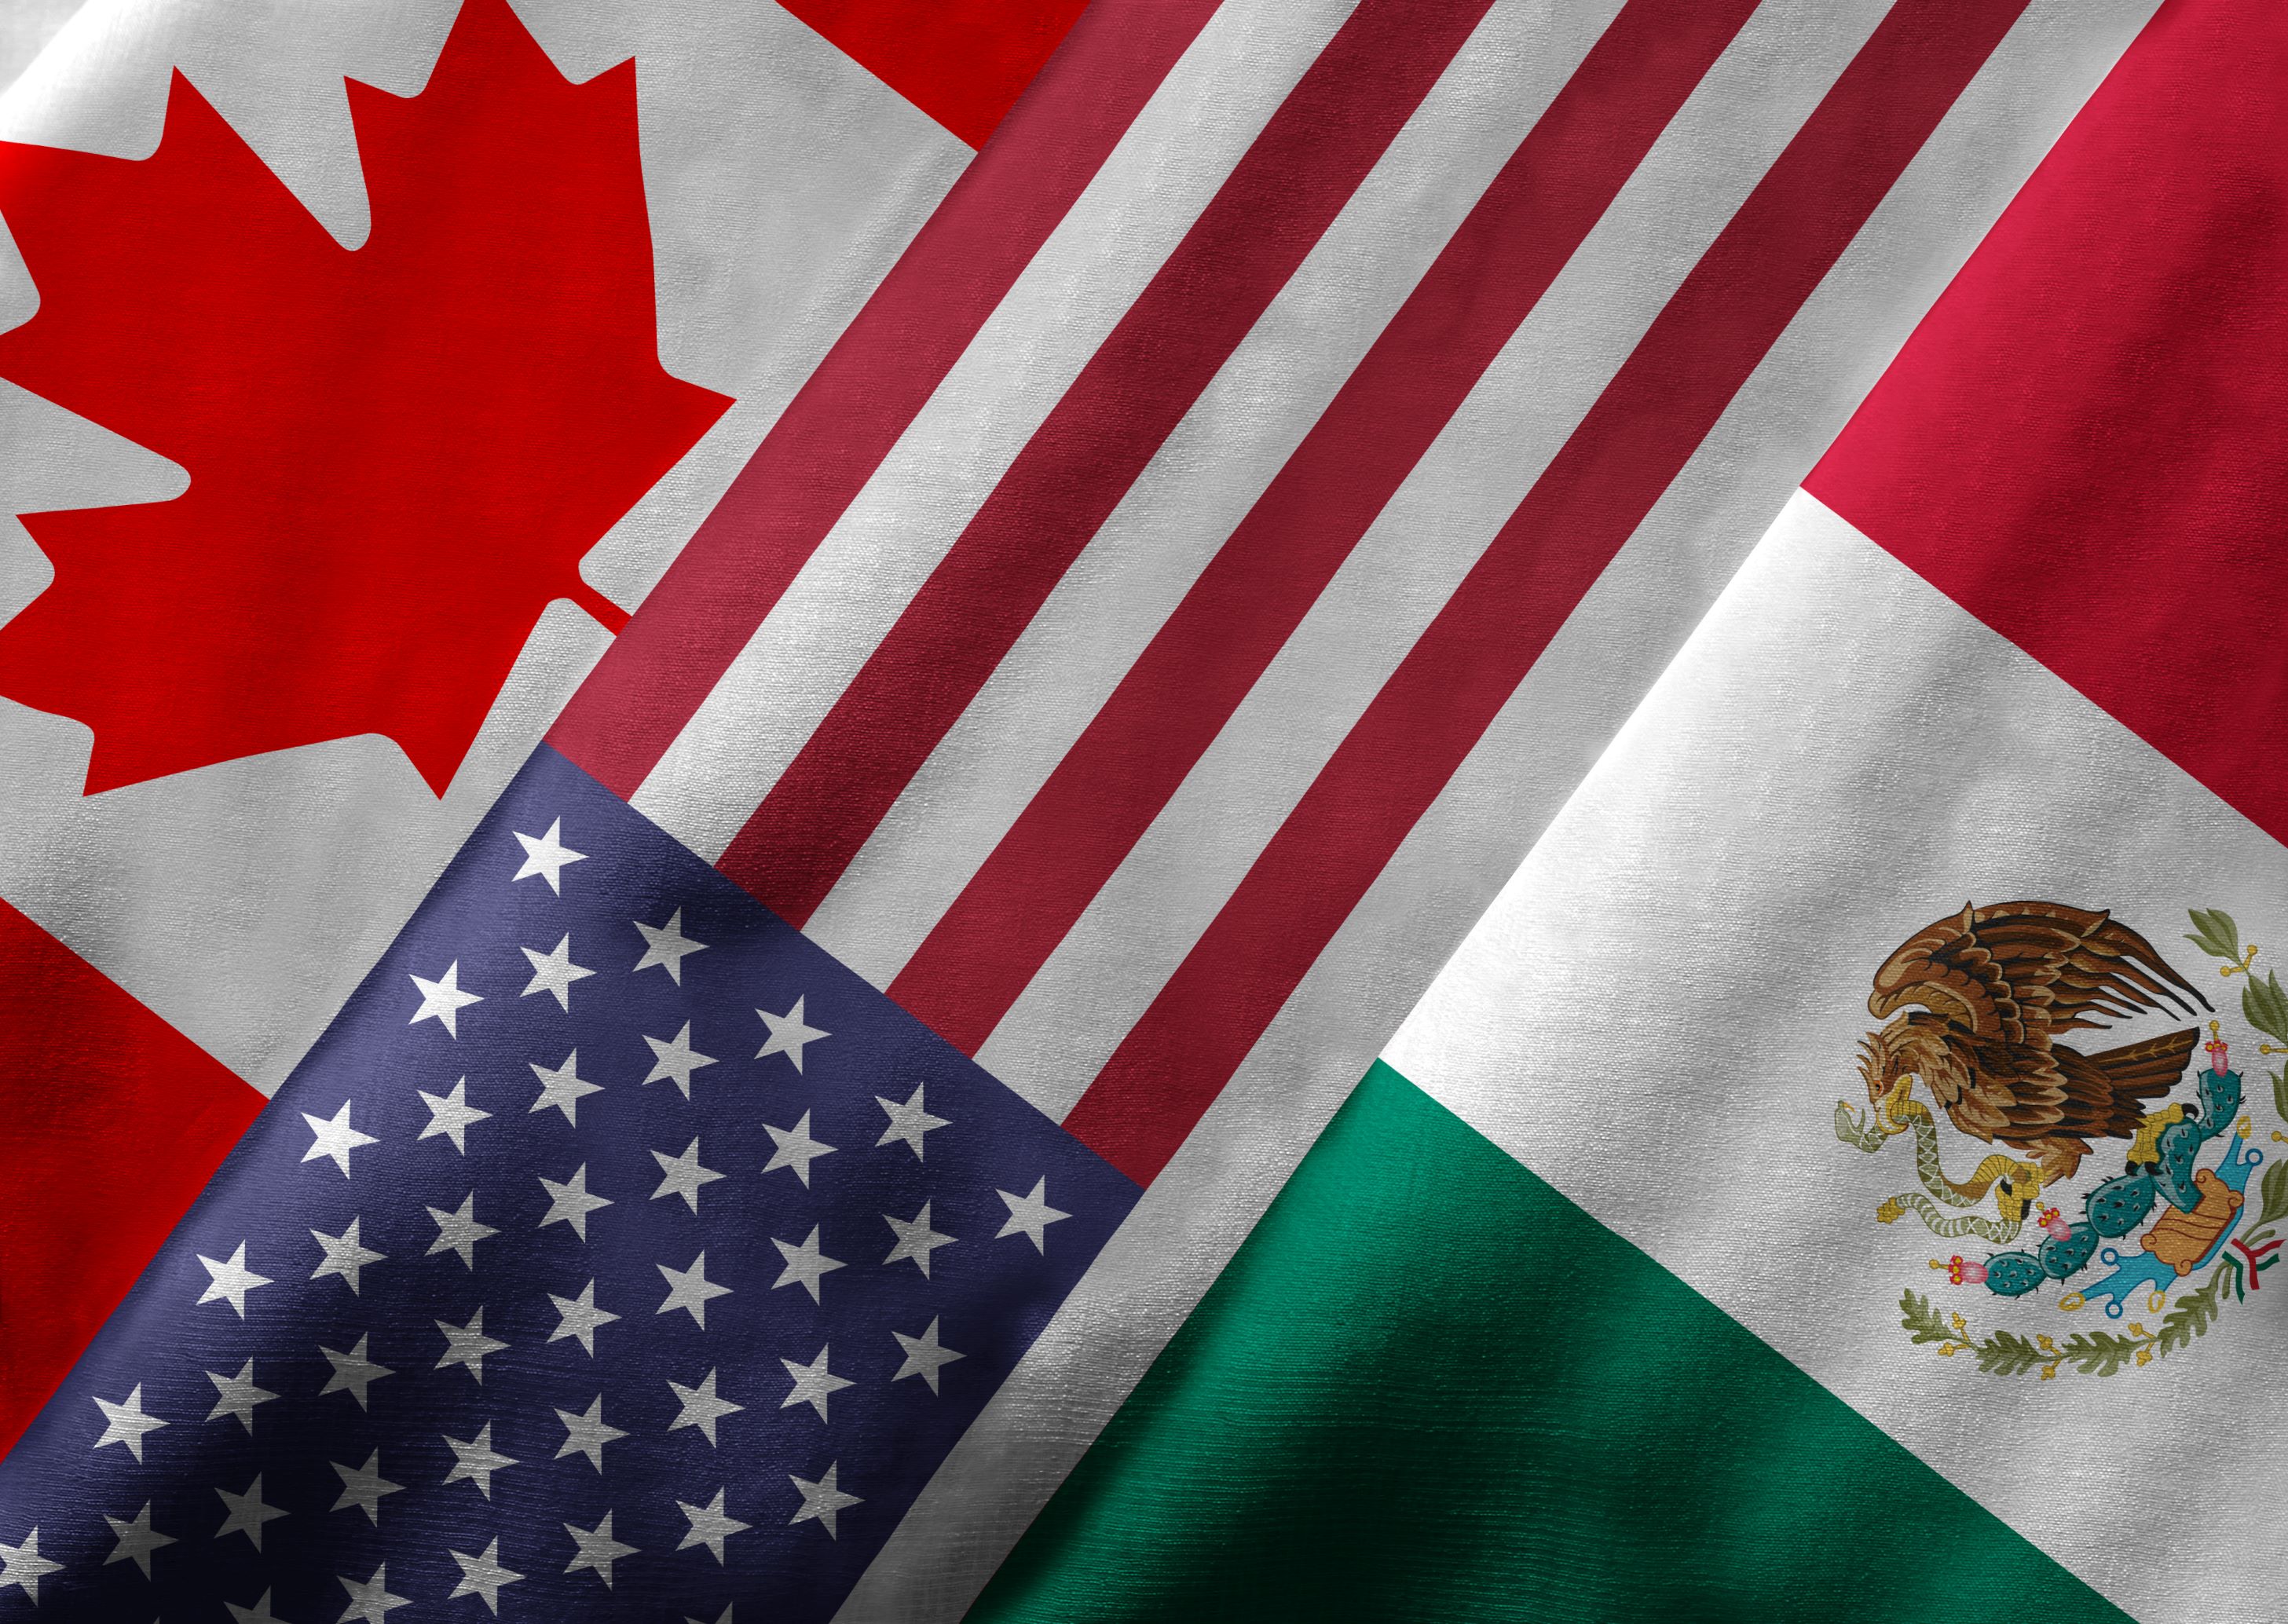 US, Canada and Mexico's flags